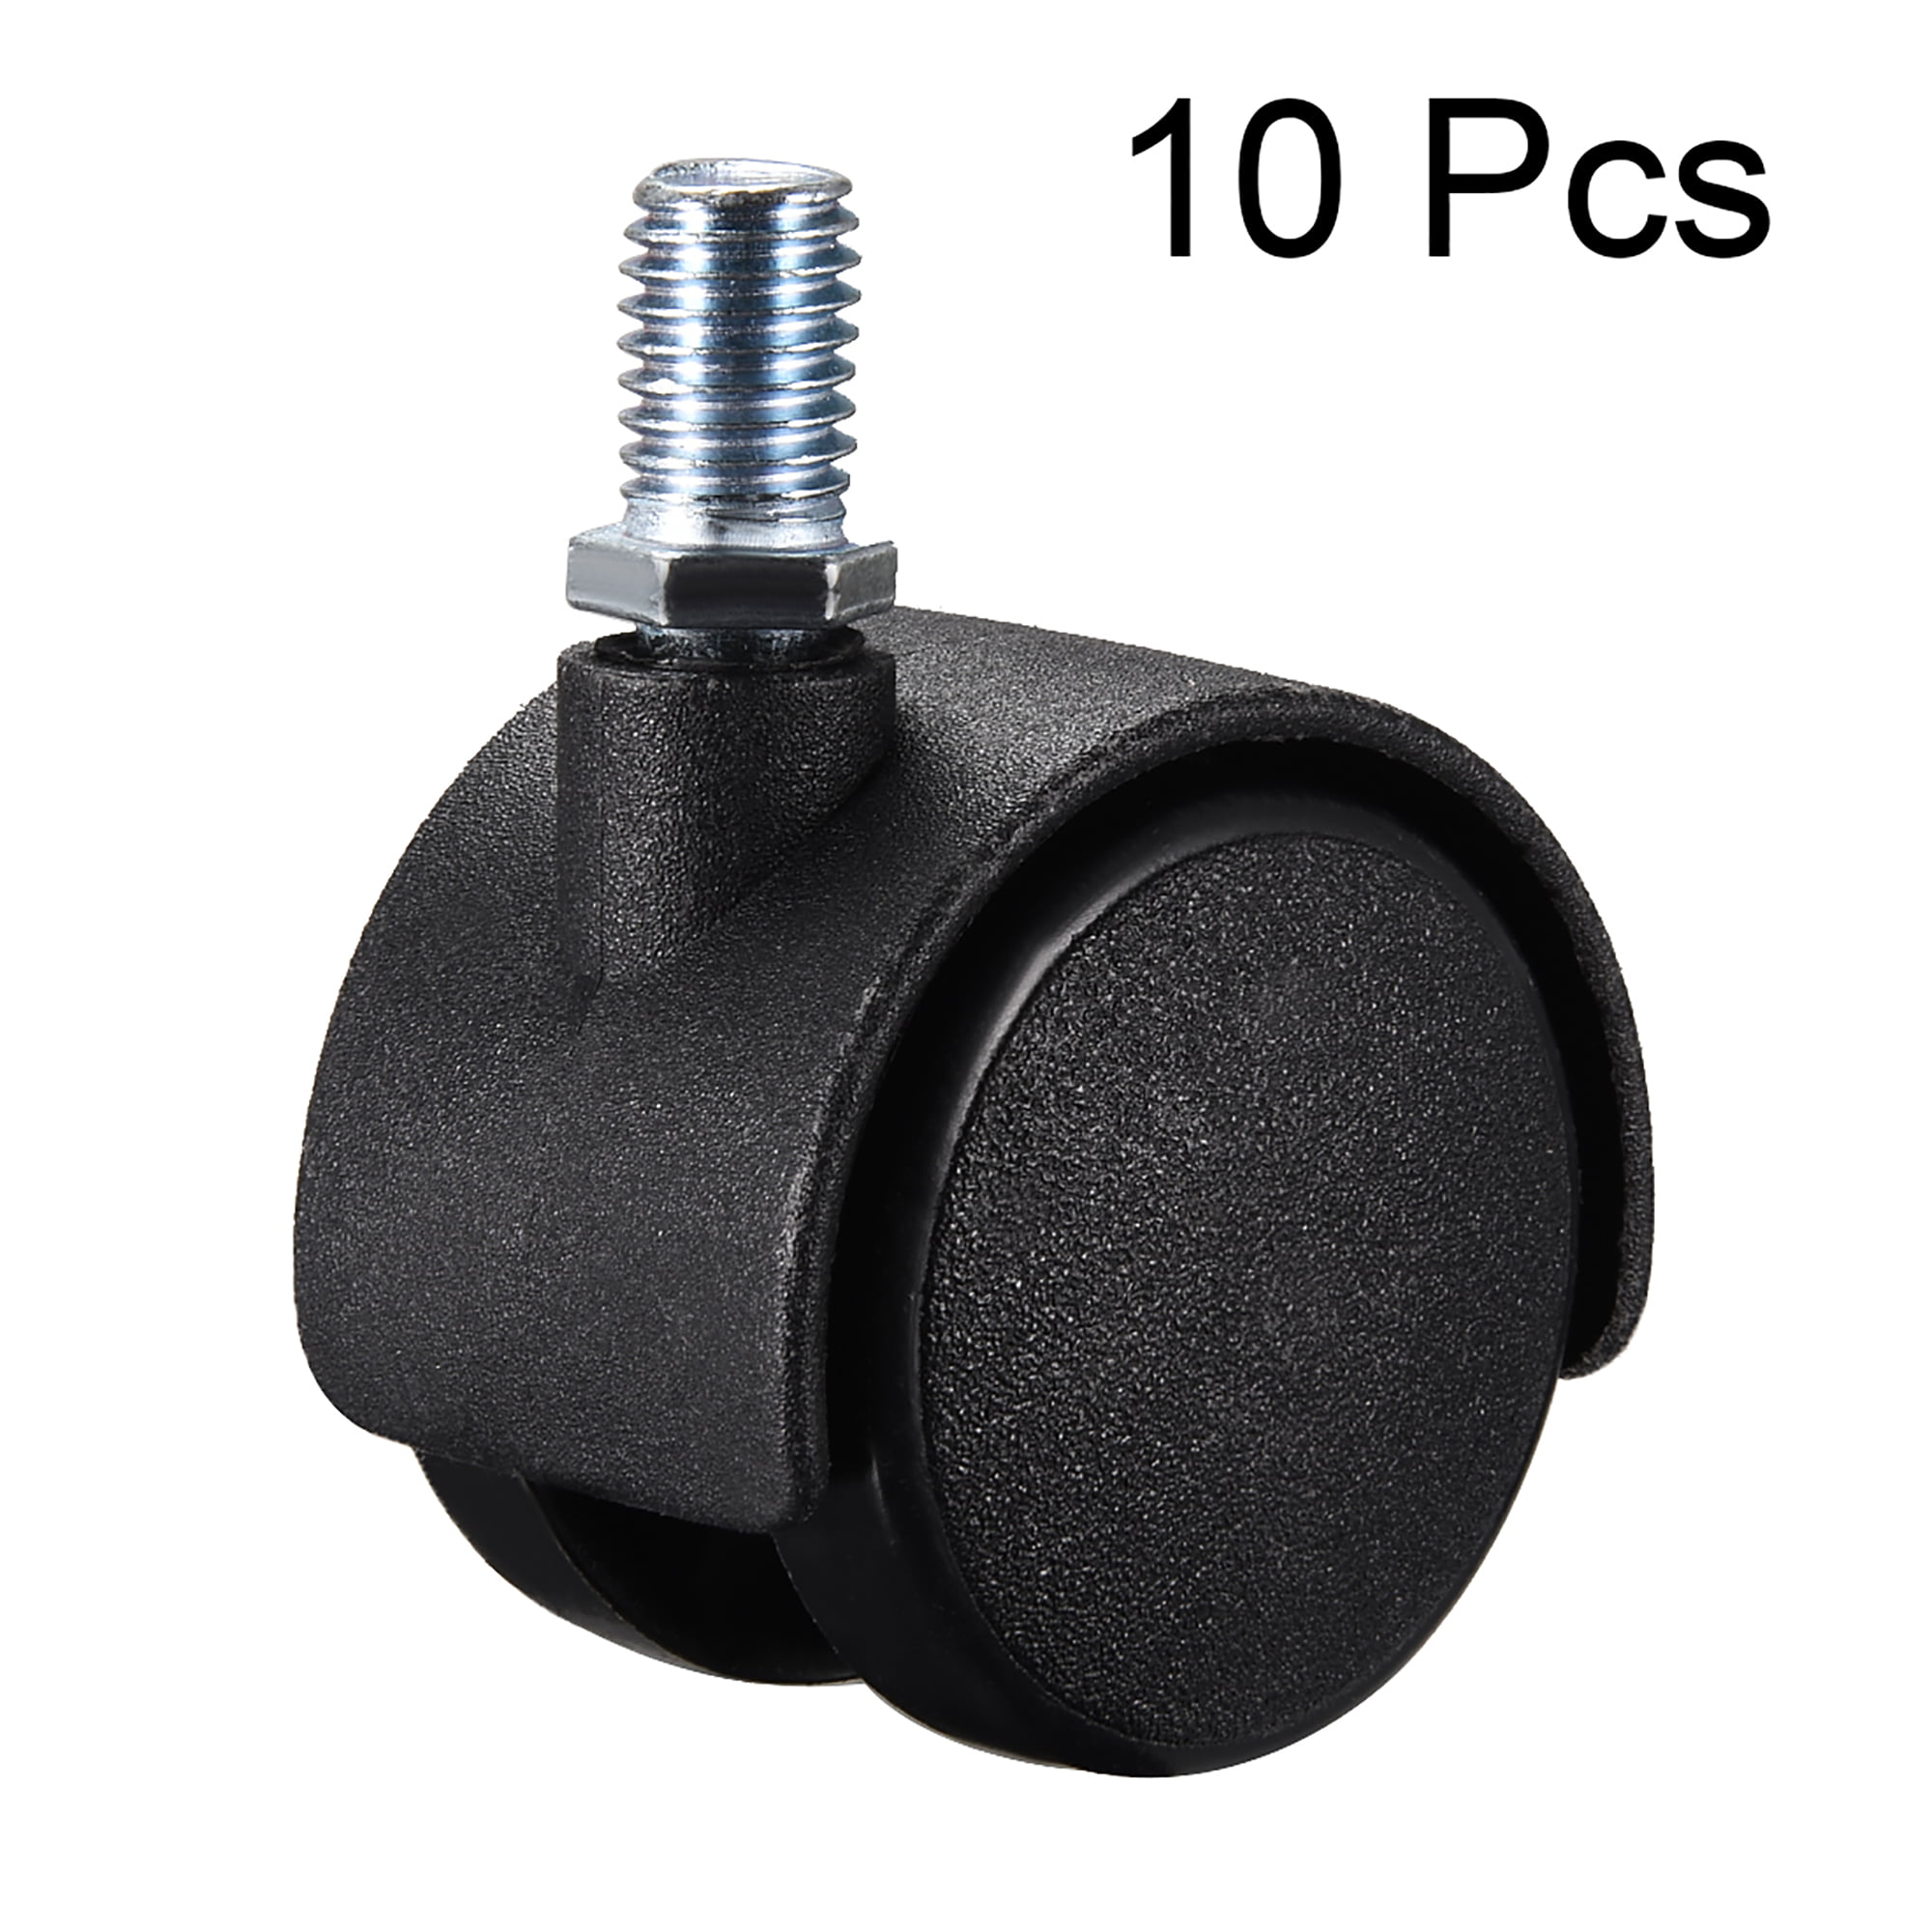 Bxfdc 1.5 39mm Threaded Stem Caster Wheels,Ball Swivel Caster Wheels,Nylon Furniture Wheels,Moving Castors,Replacement for Sofa Baby Carriage Coffee Table,Stem High 15mm,Set of 4 Size : M10 